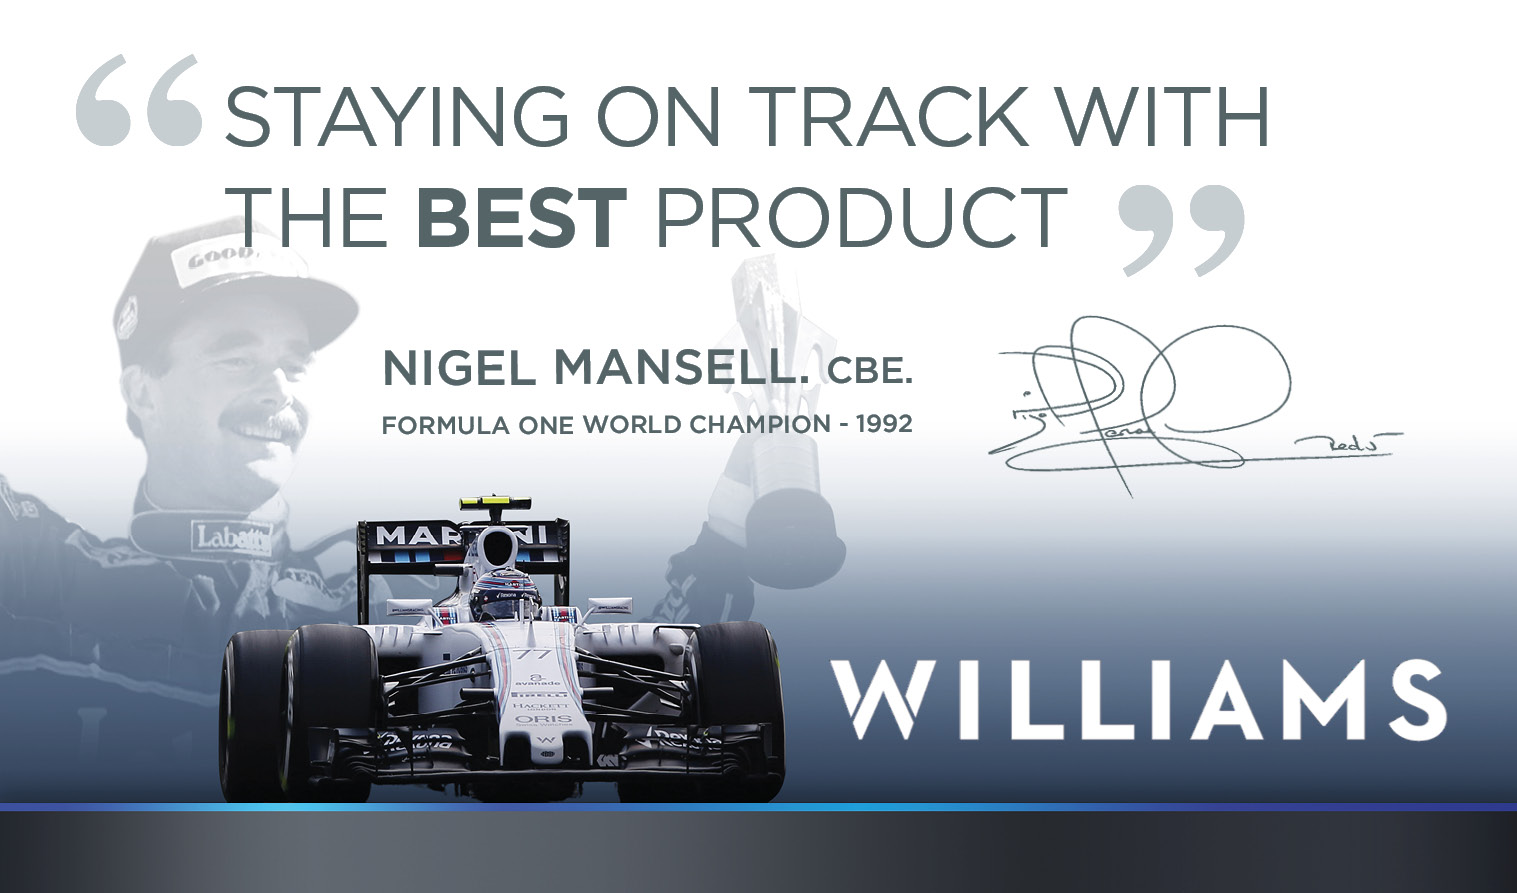 Williams video screen grab showing racing car and Nigel Mansell with signature